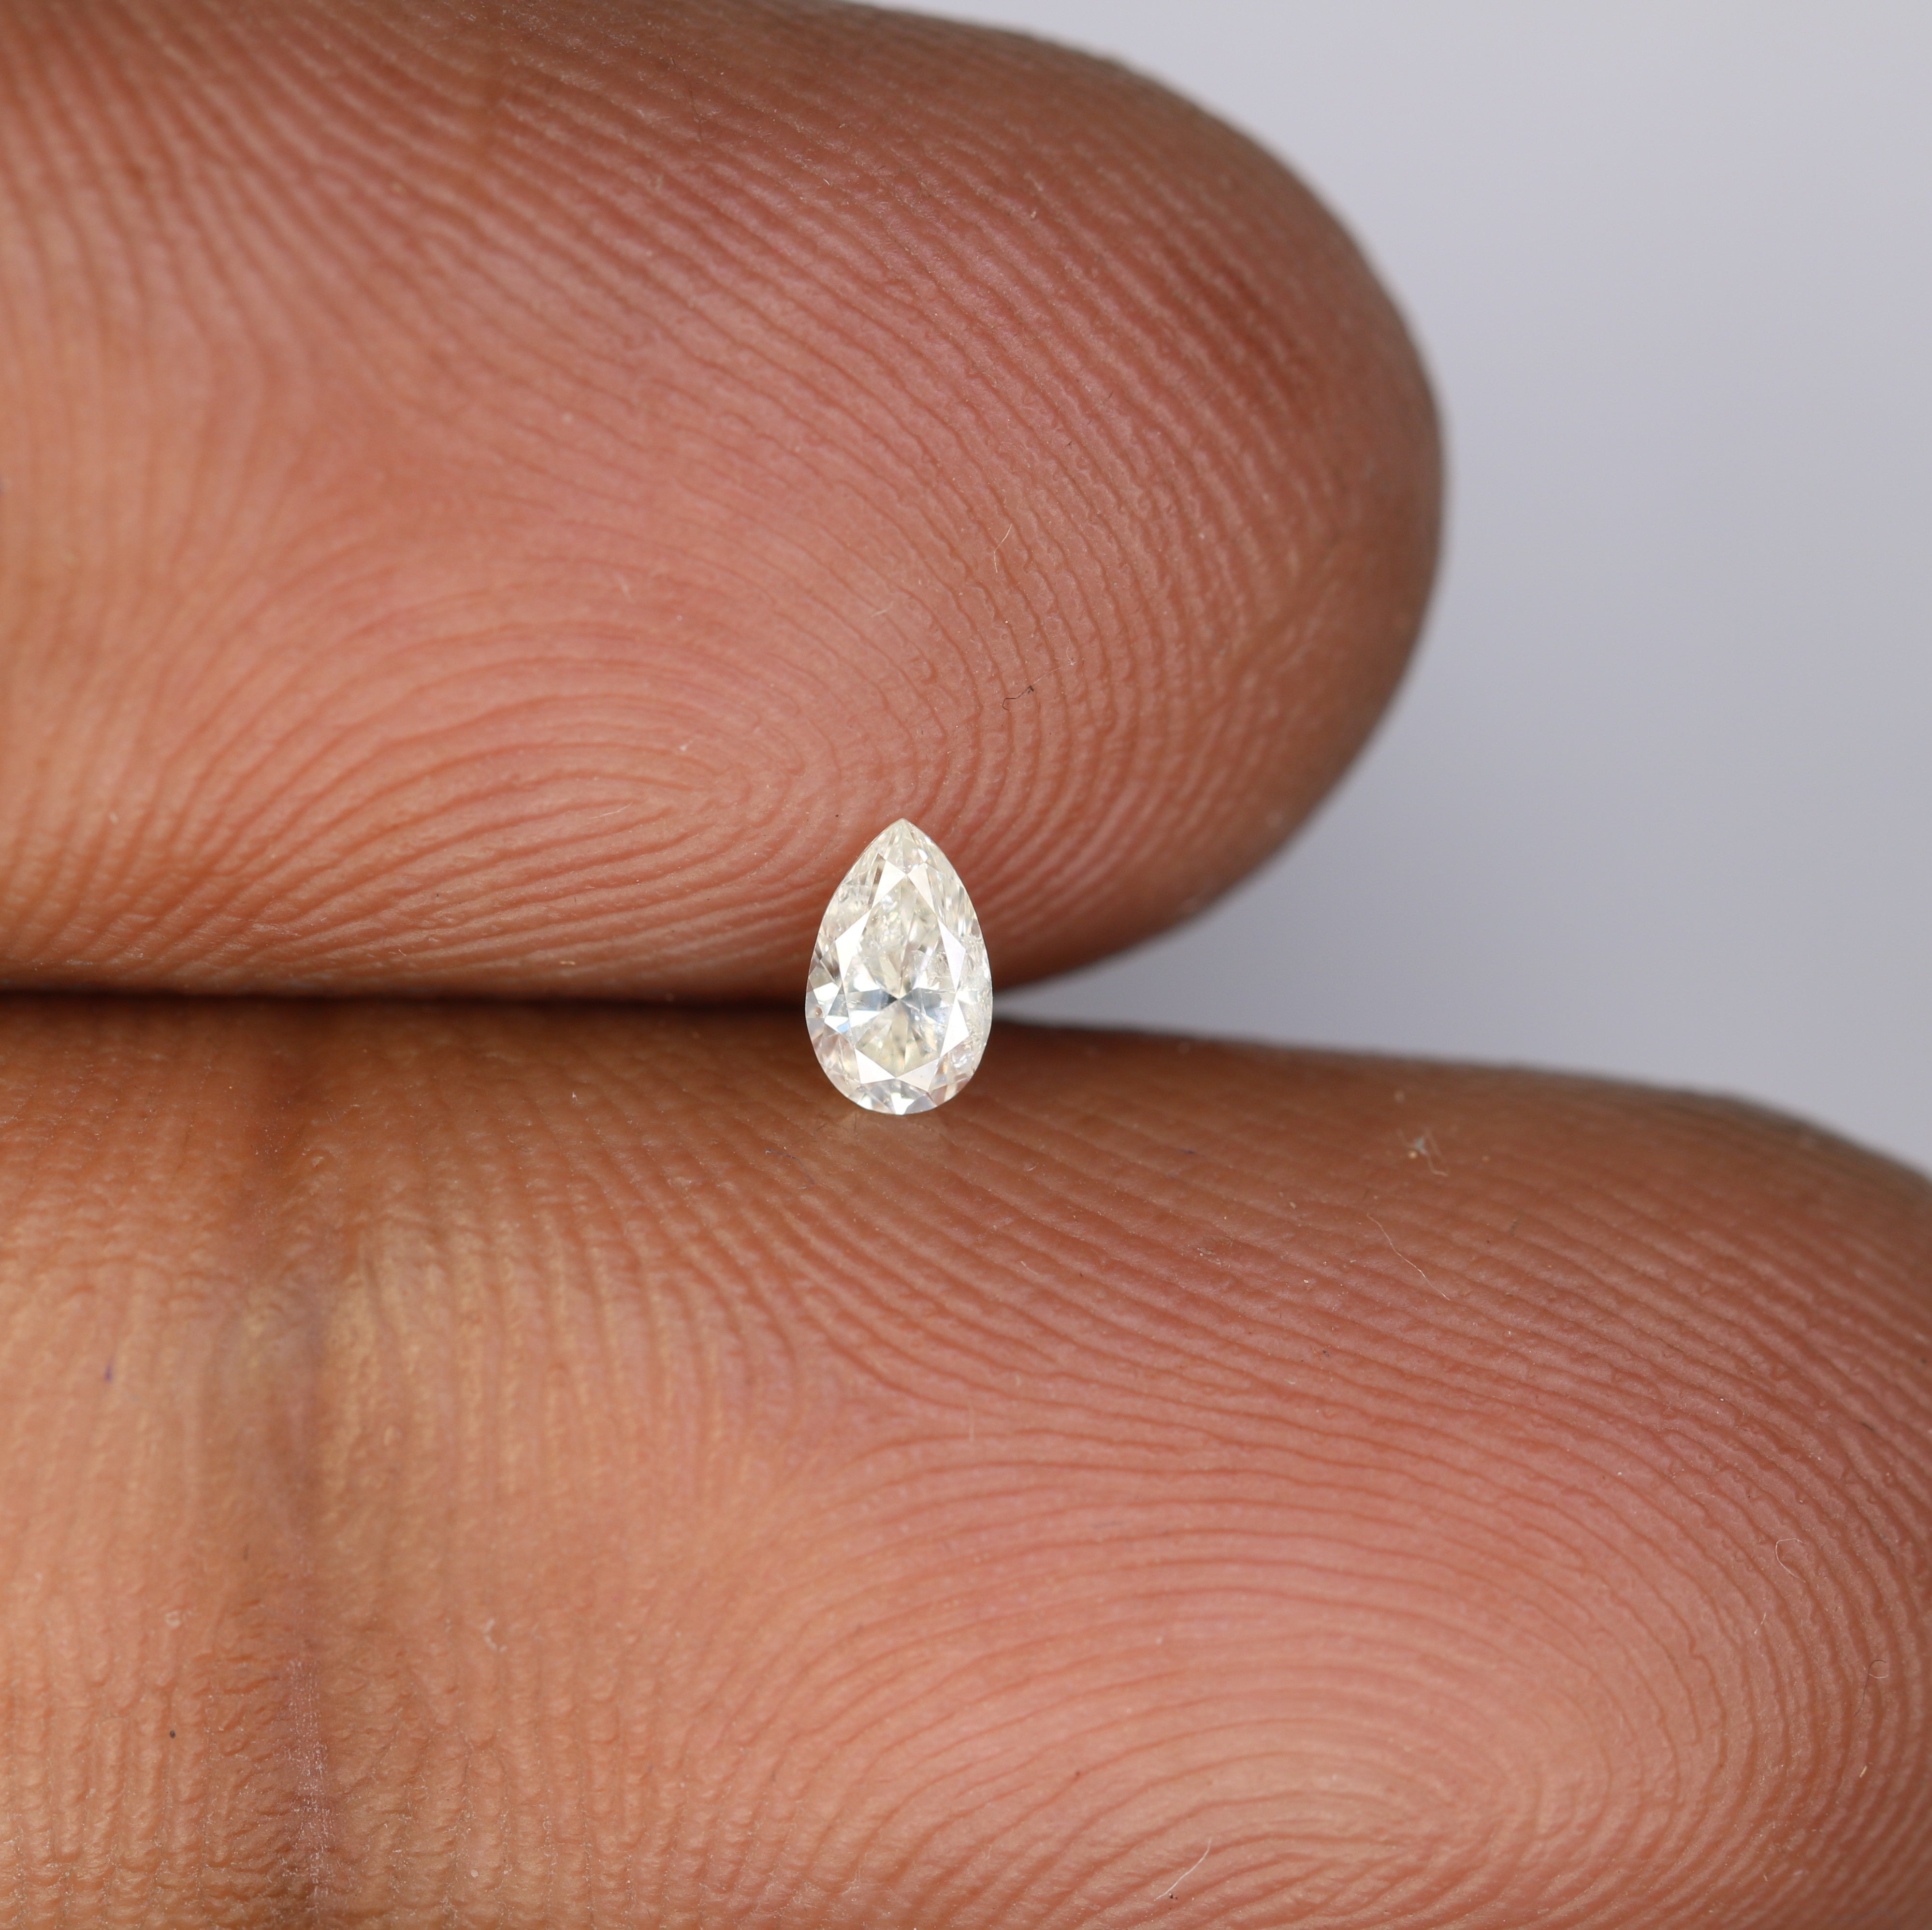 0.19 CT Natural White Pear Cut Diamond For Engagement Ring